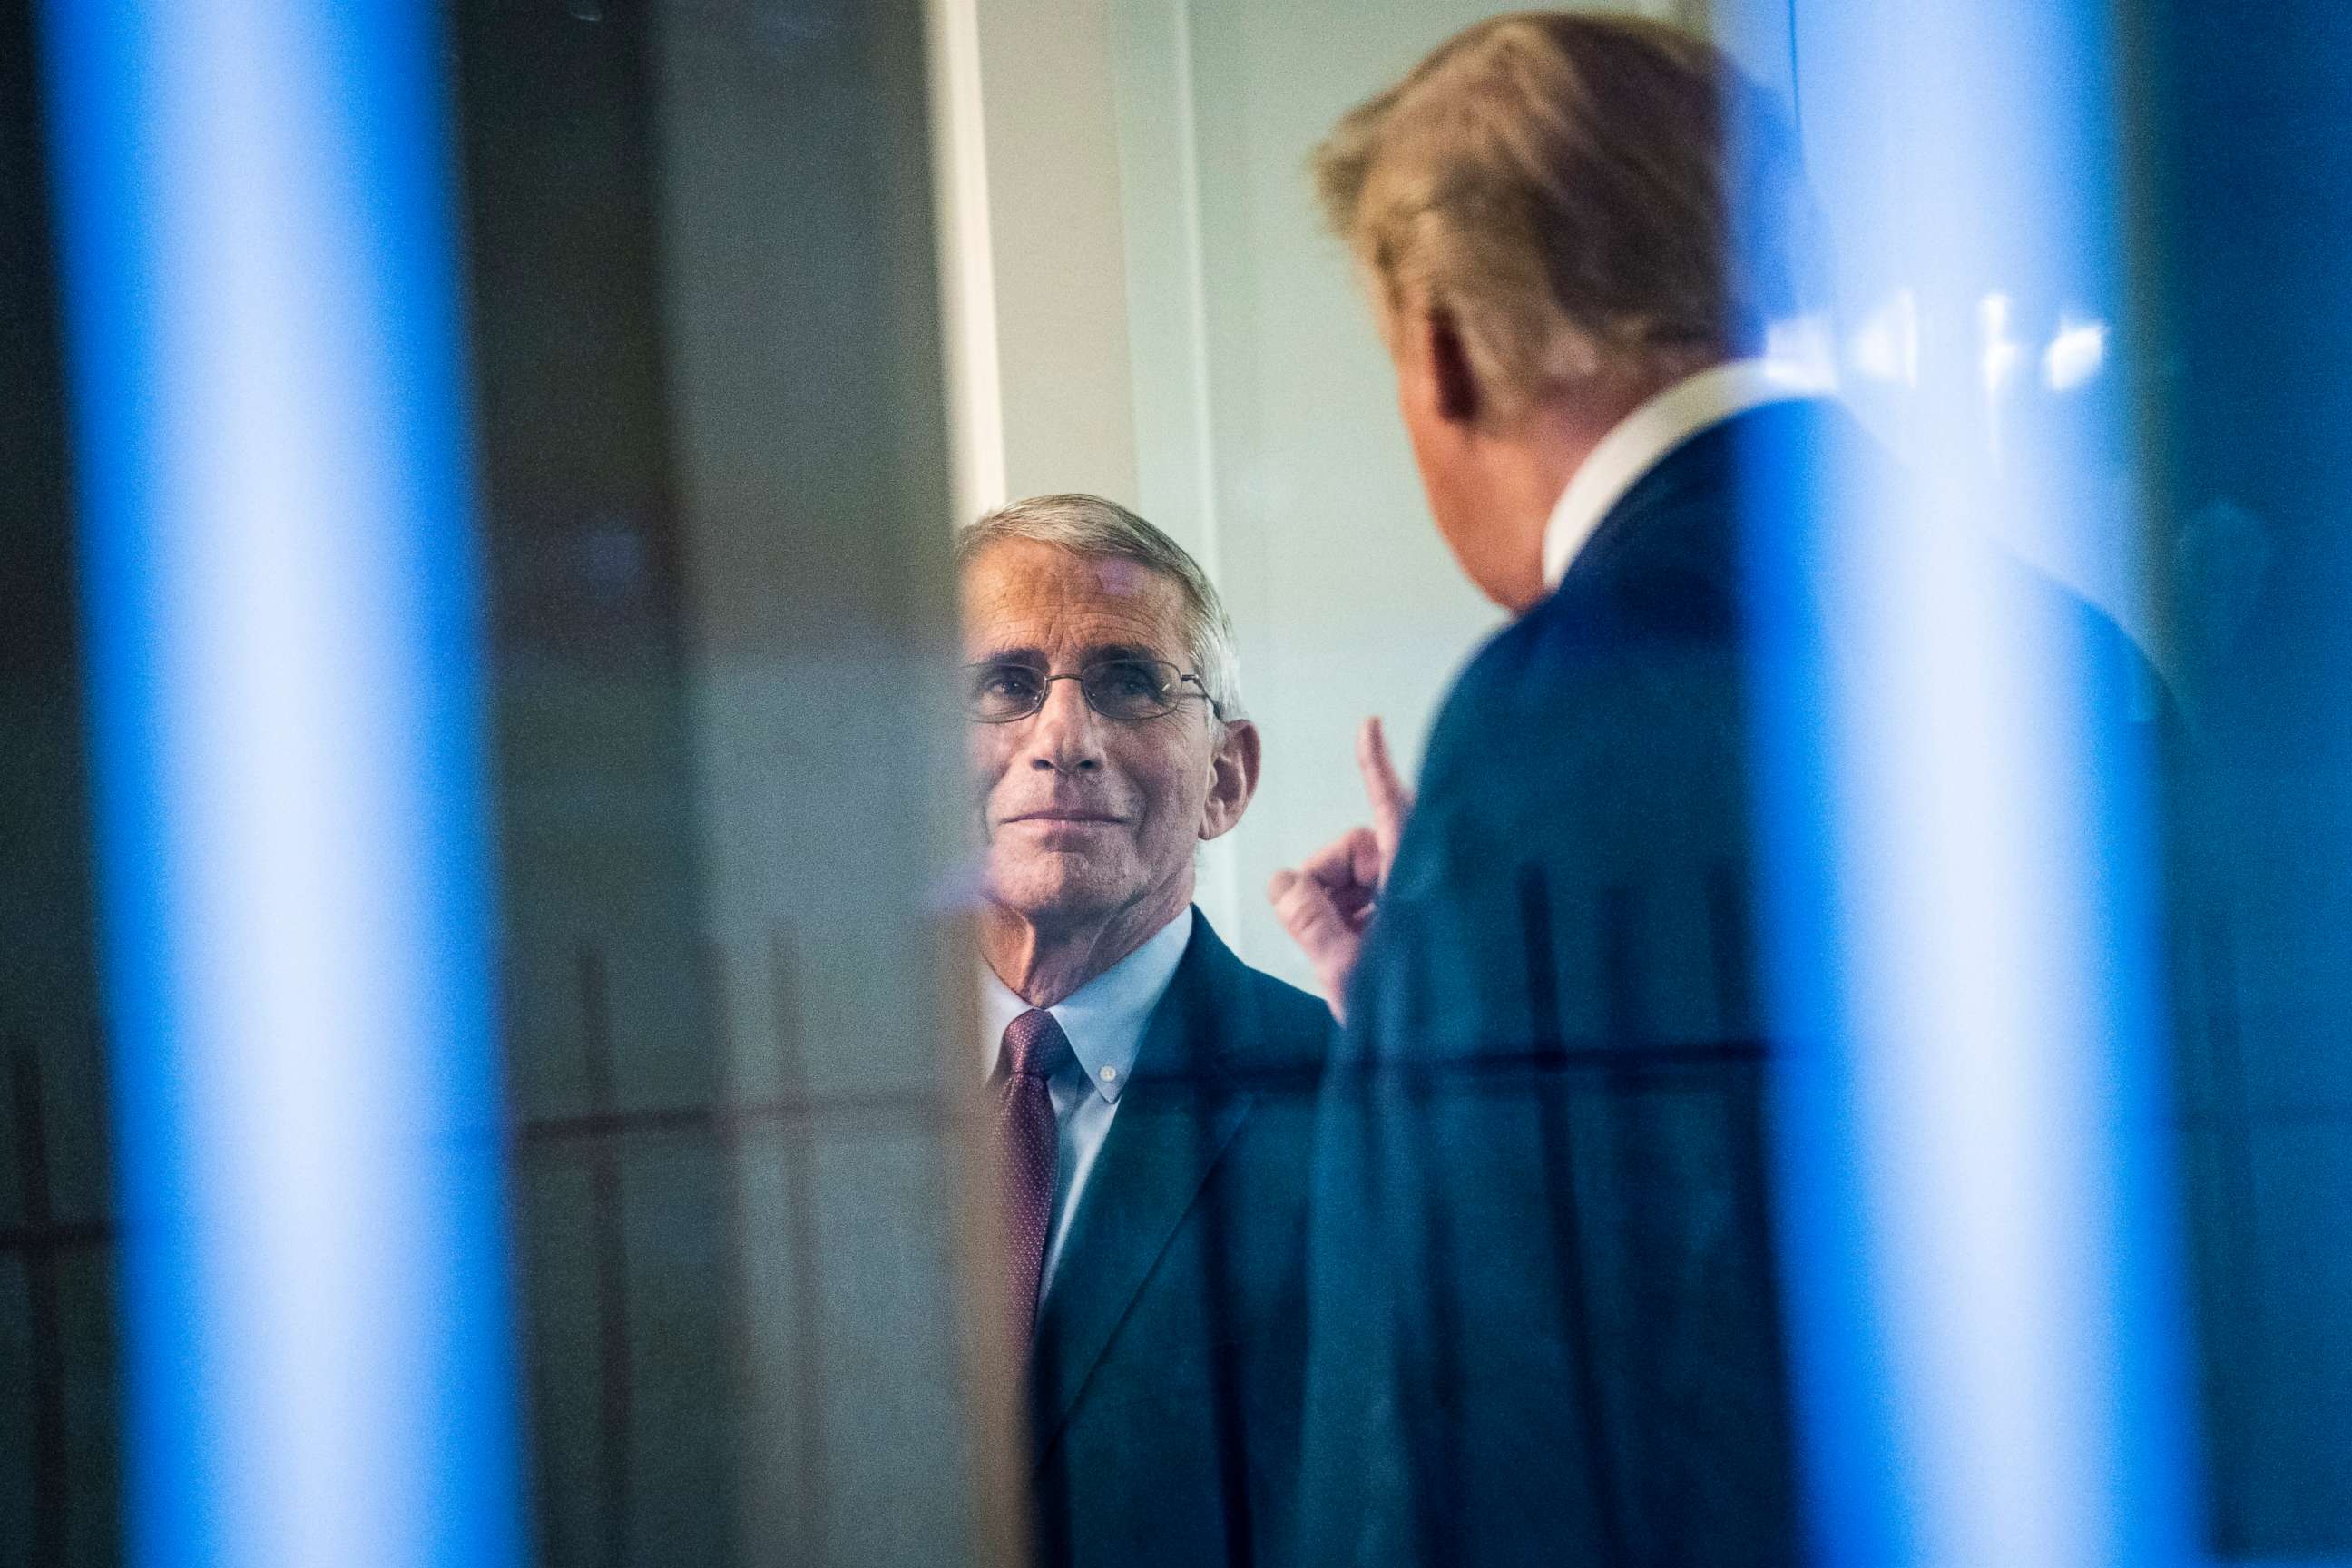 PHOTO: President Donald J. Trump speaks with Dr. Anthony Fauci in the press office moments after speaking with members of the coronavirus task force during a briefing in response to the COVID-19 coronavirus pandemic, April 22, 2020, in Washington, DC.